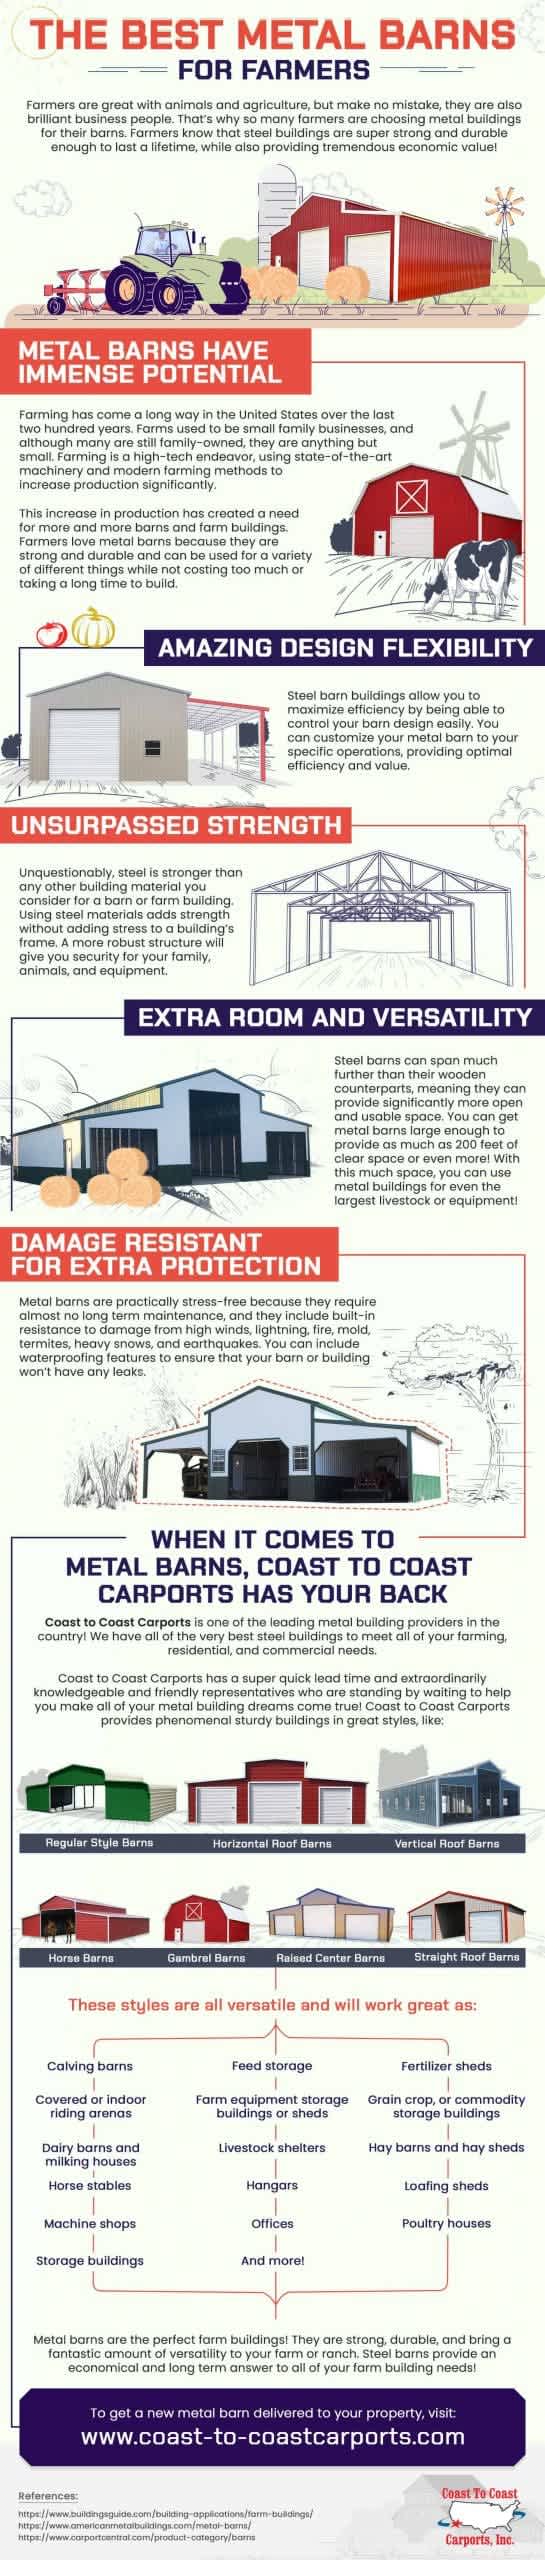 the-best-metal-barns-for-farmers